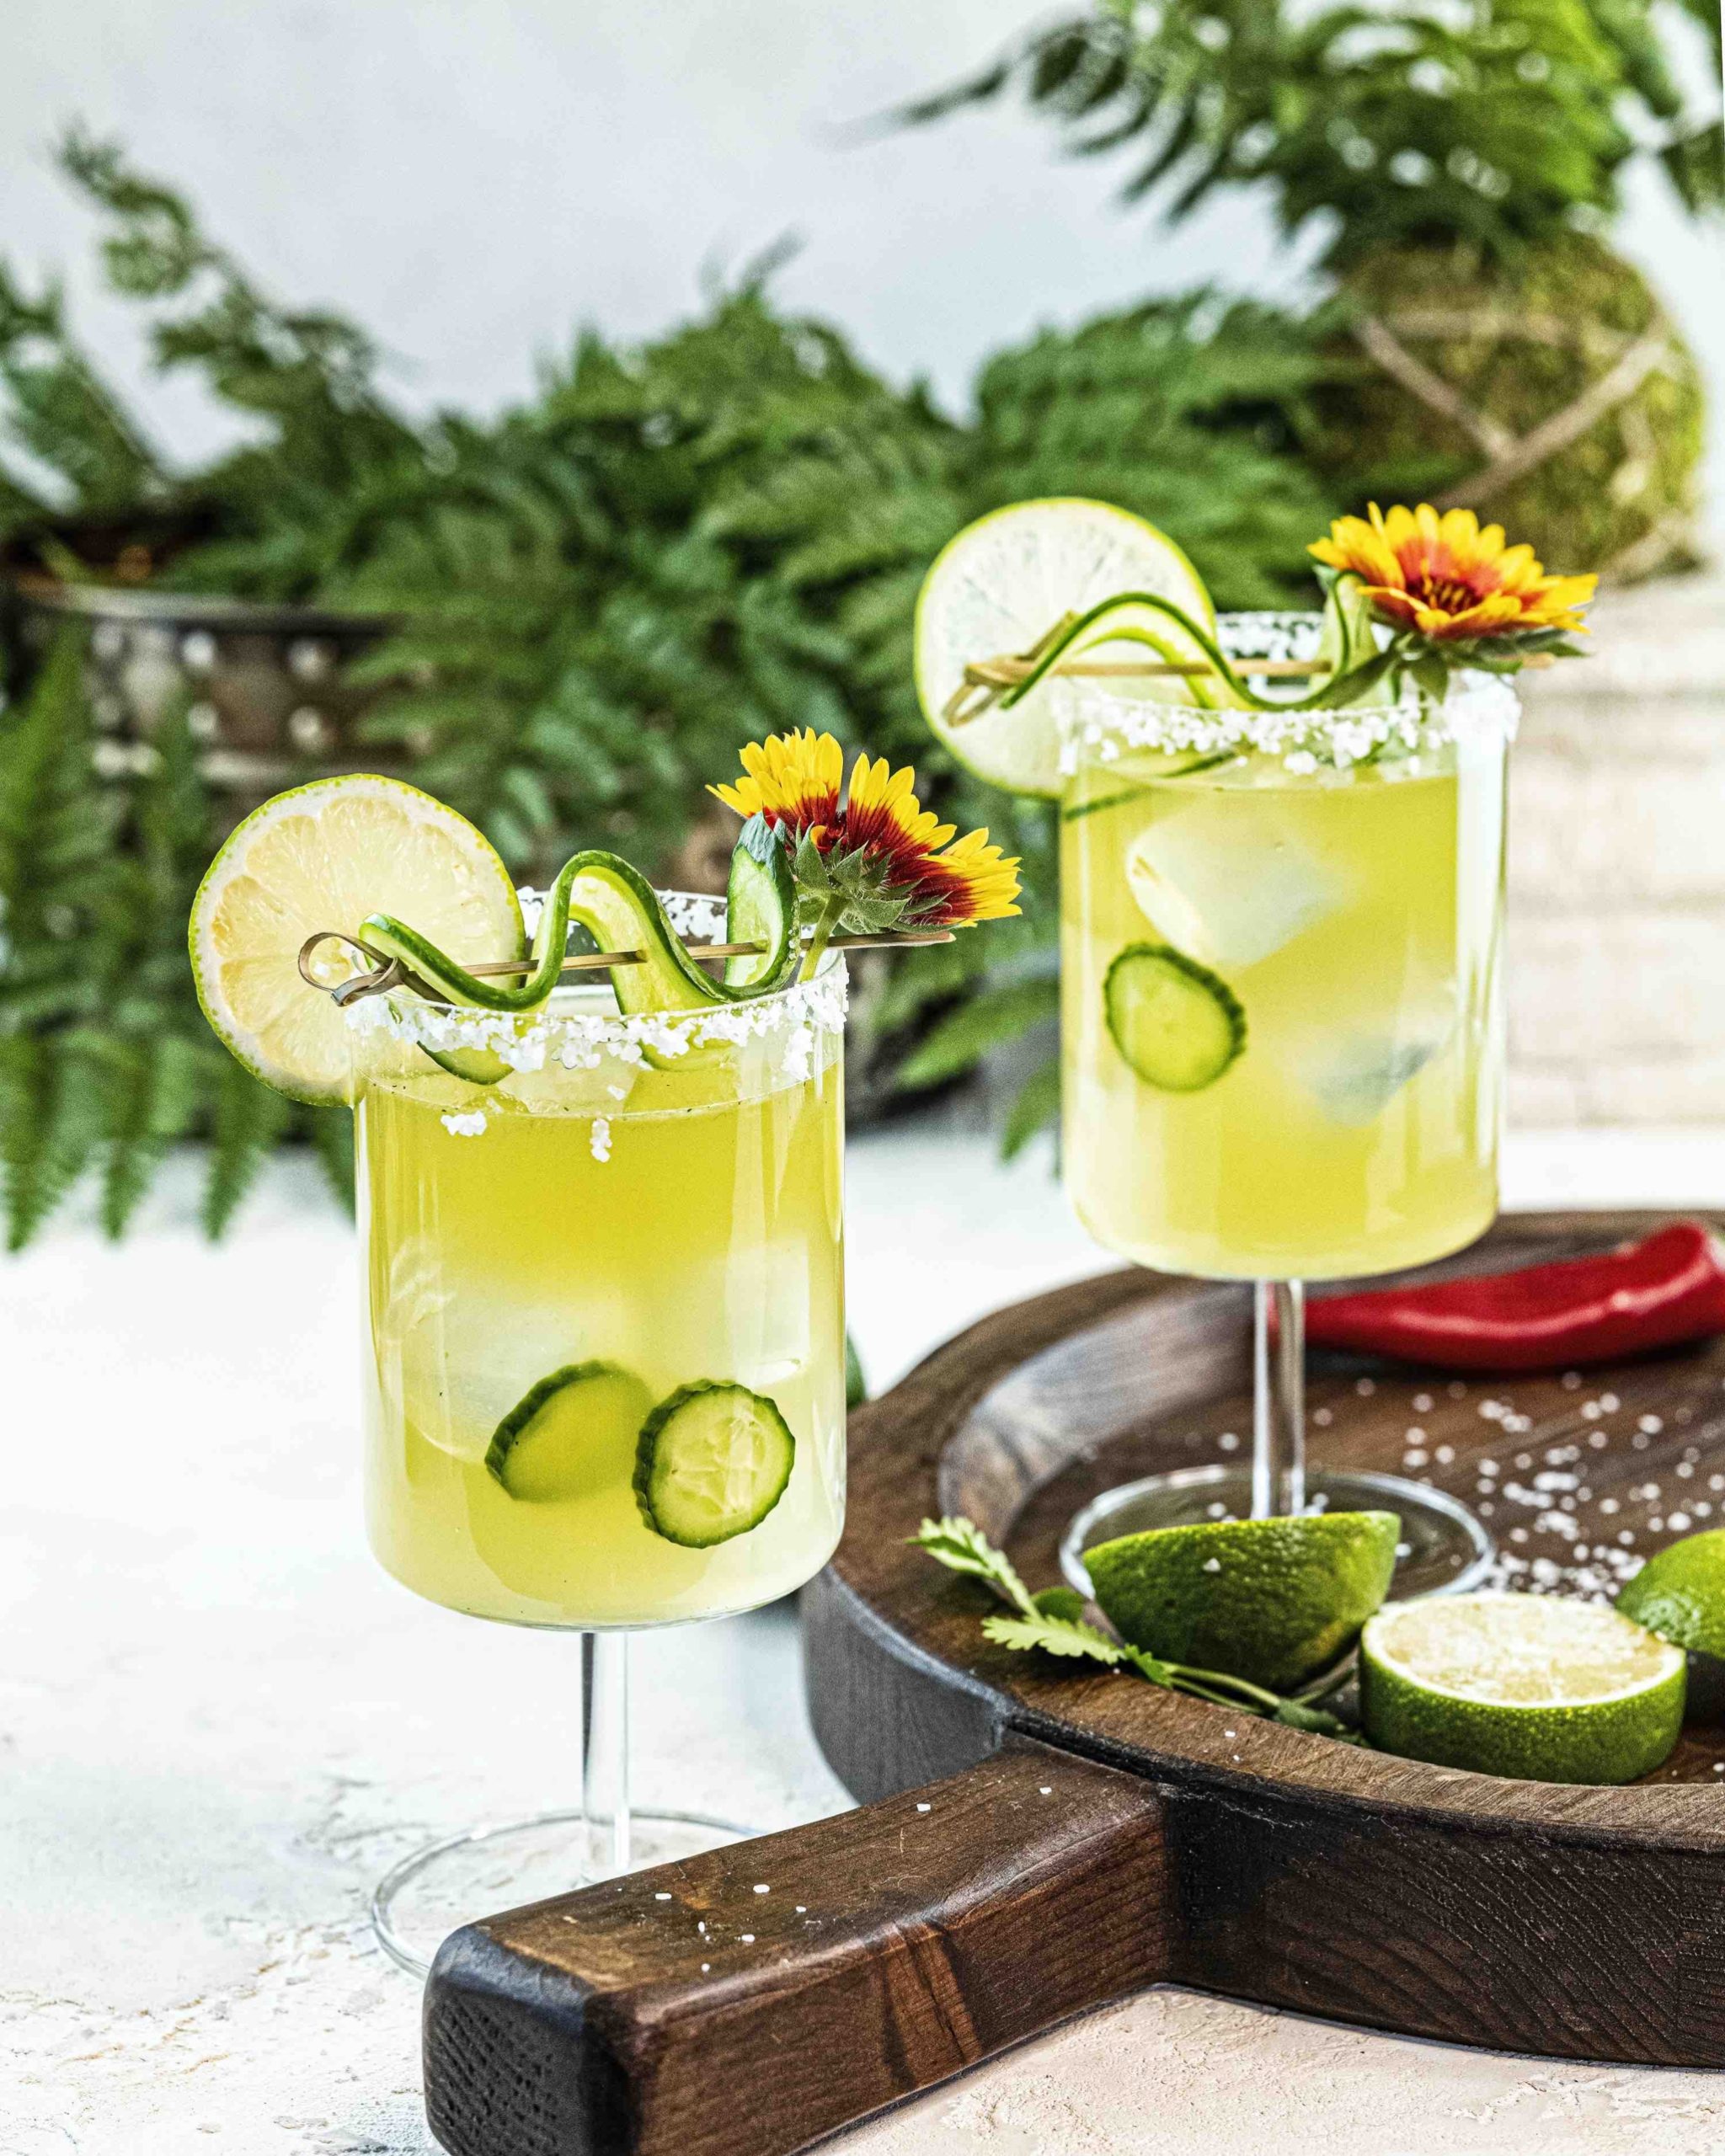 THE BEST COCKTAILS TO DRINK ON NATIONAL TEQUILA DAY